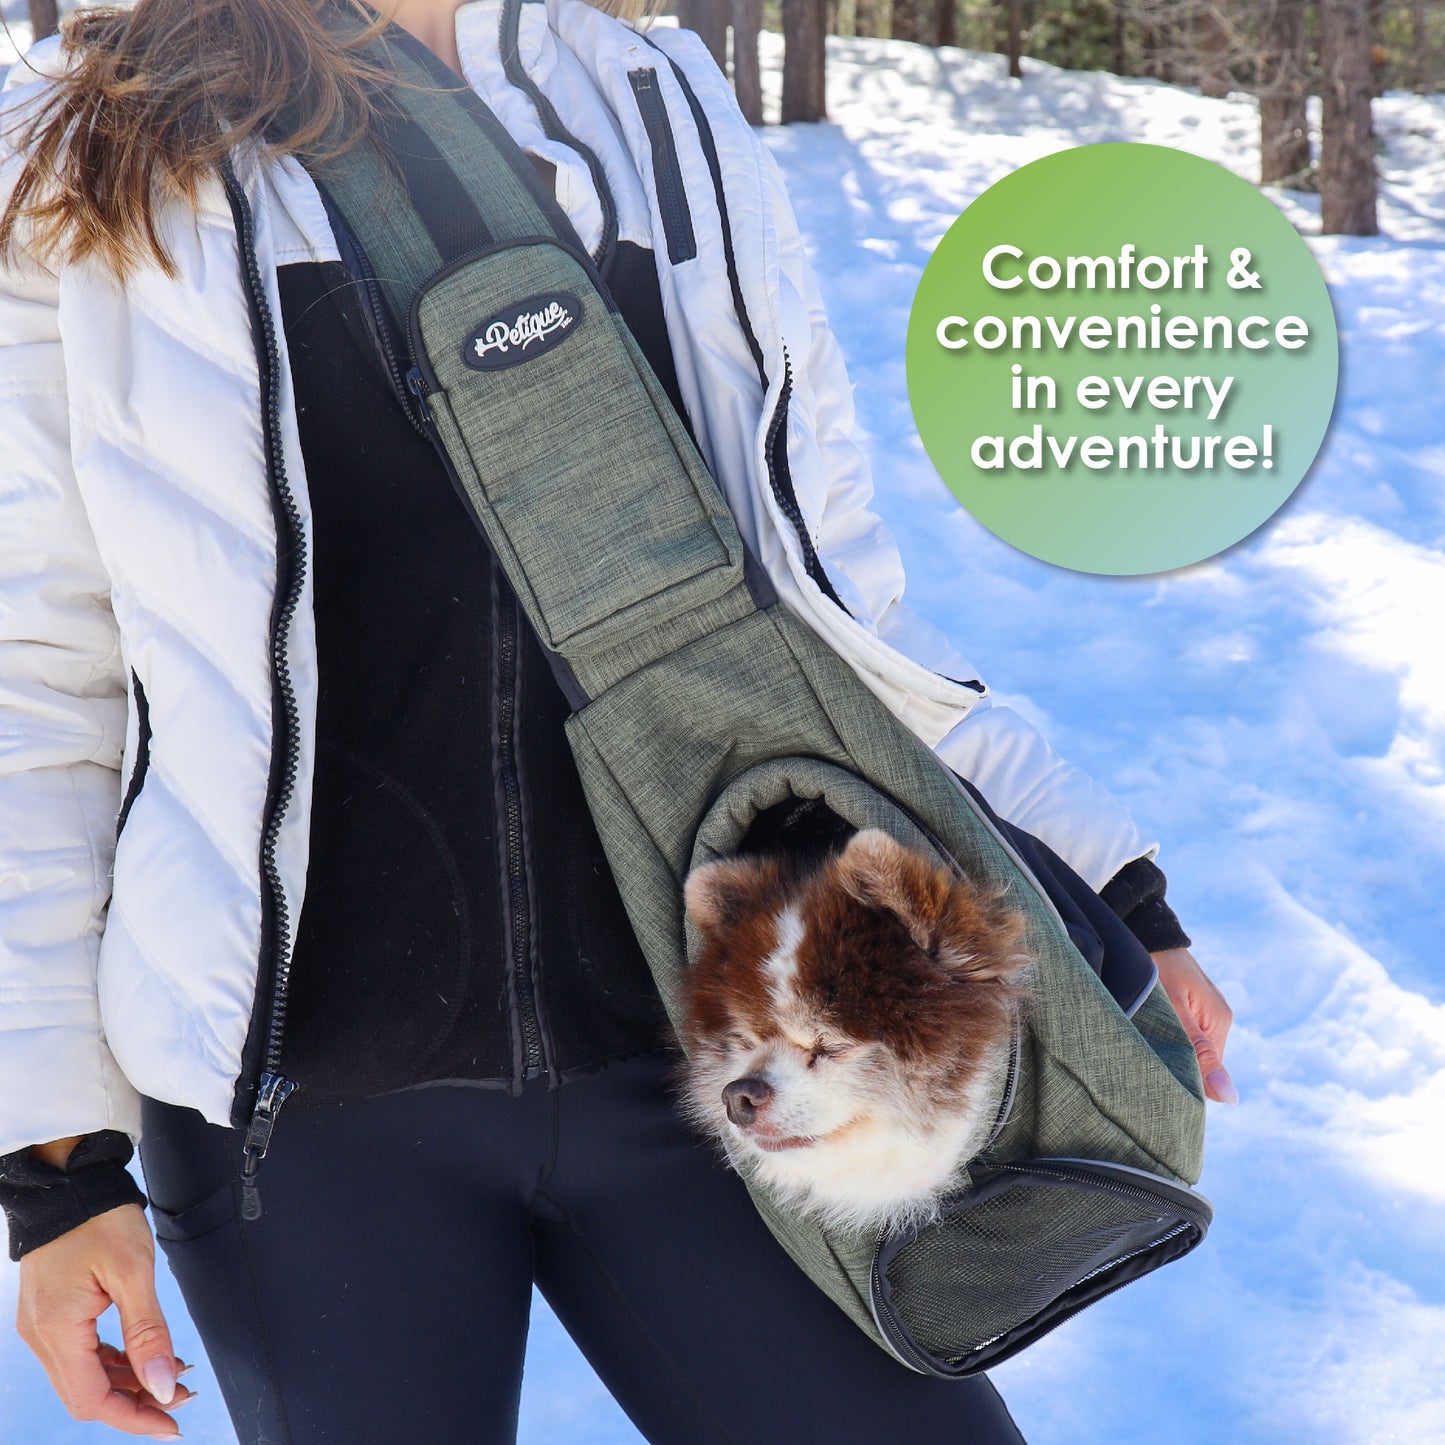 Sling Pet Carrier: Hands-Free, Over-the-Shoulder Design, Mesh Peekaboo Window, Adjustable Leash, Padded Strap, Patented Pee Pad Insert, Reflective Lining, Folds Flat, Secure Zipper Pocket, Sturdy Board for Dogs, Cats, Small Animals, Supports up to 22 LBS